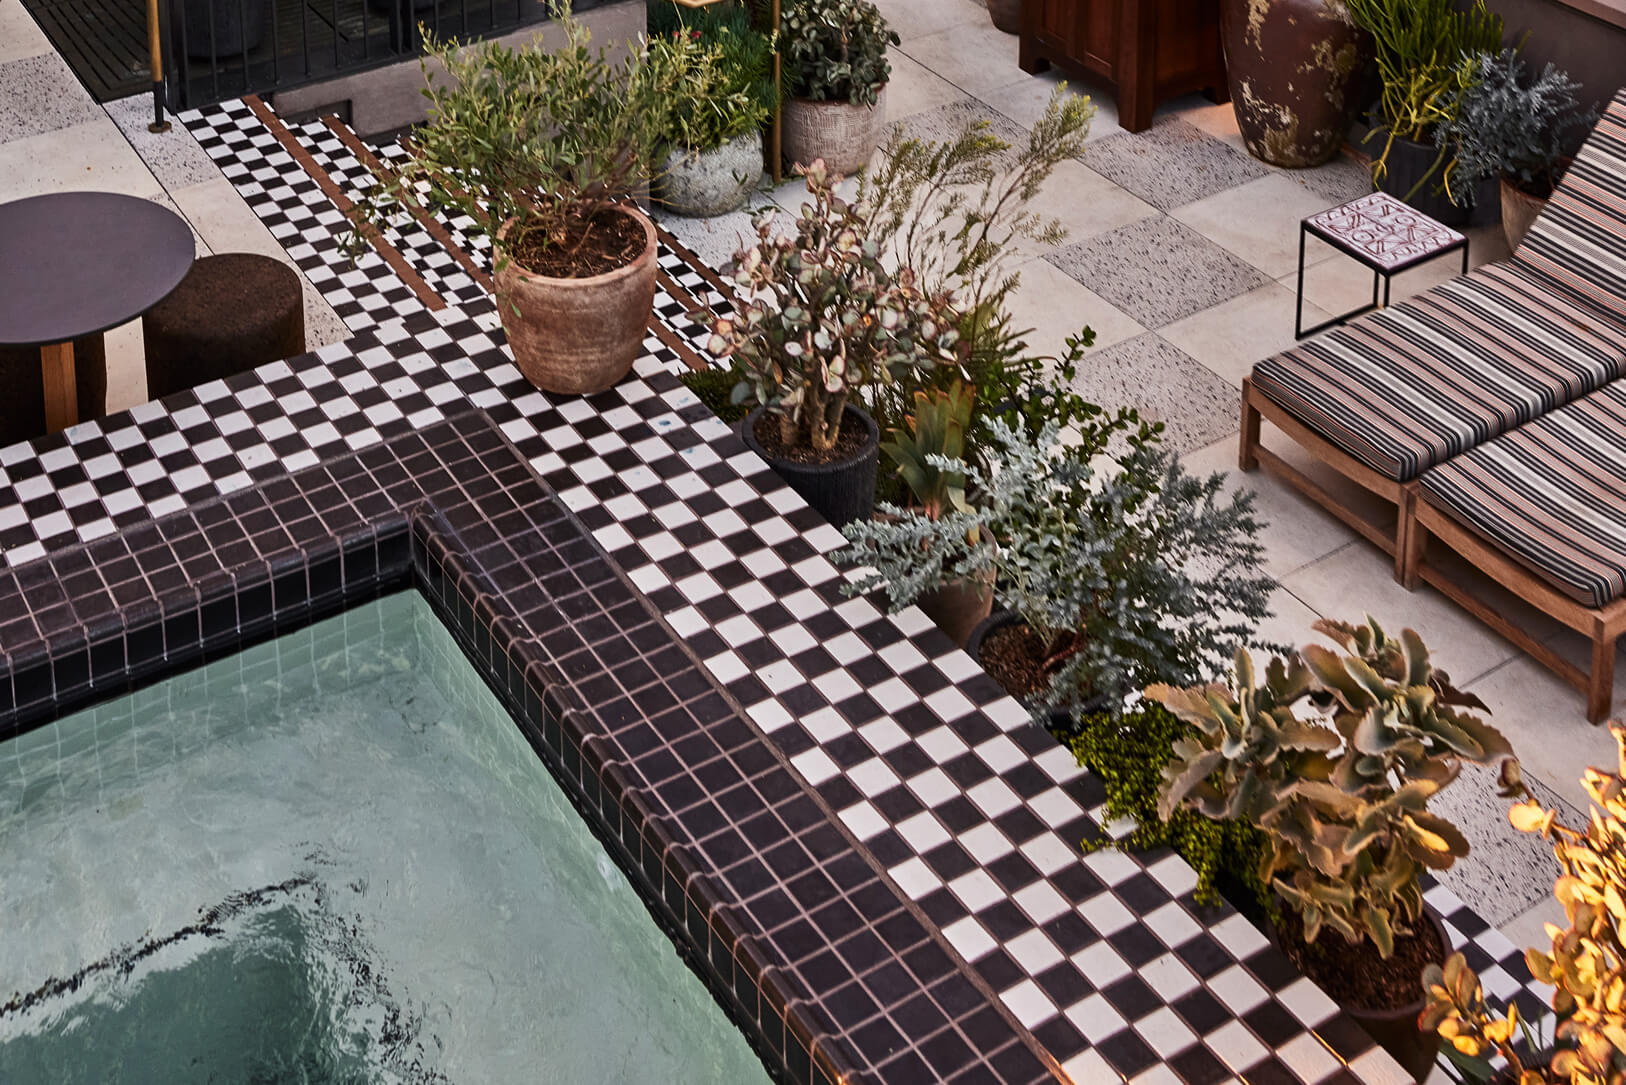 Downtown LA Proper Pool with tiled floors and loungechairs